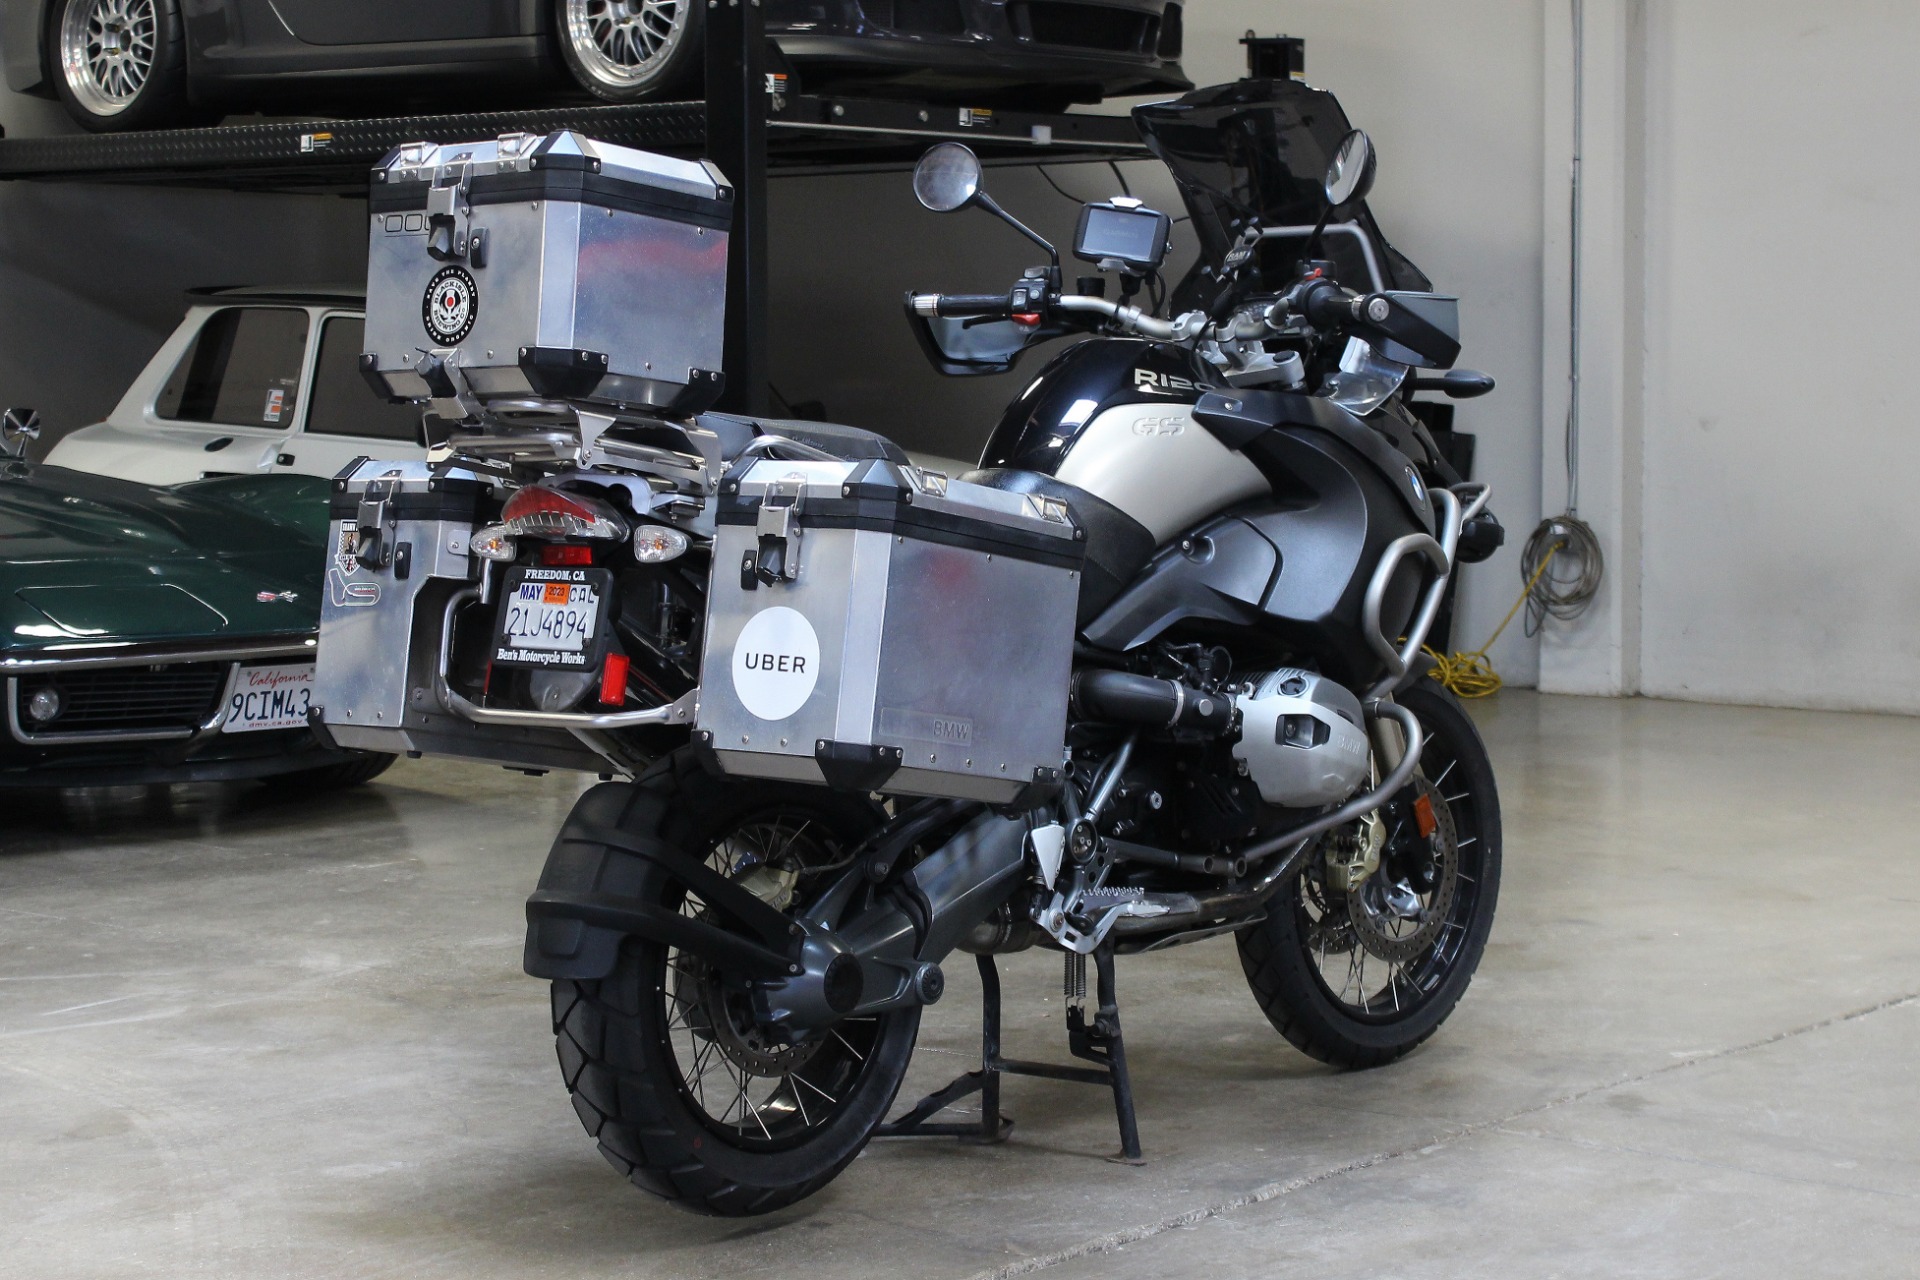 Used 2013 BMW R1200GS ADVENTURE For Sale ($10,995) | San Francisco